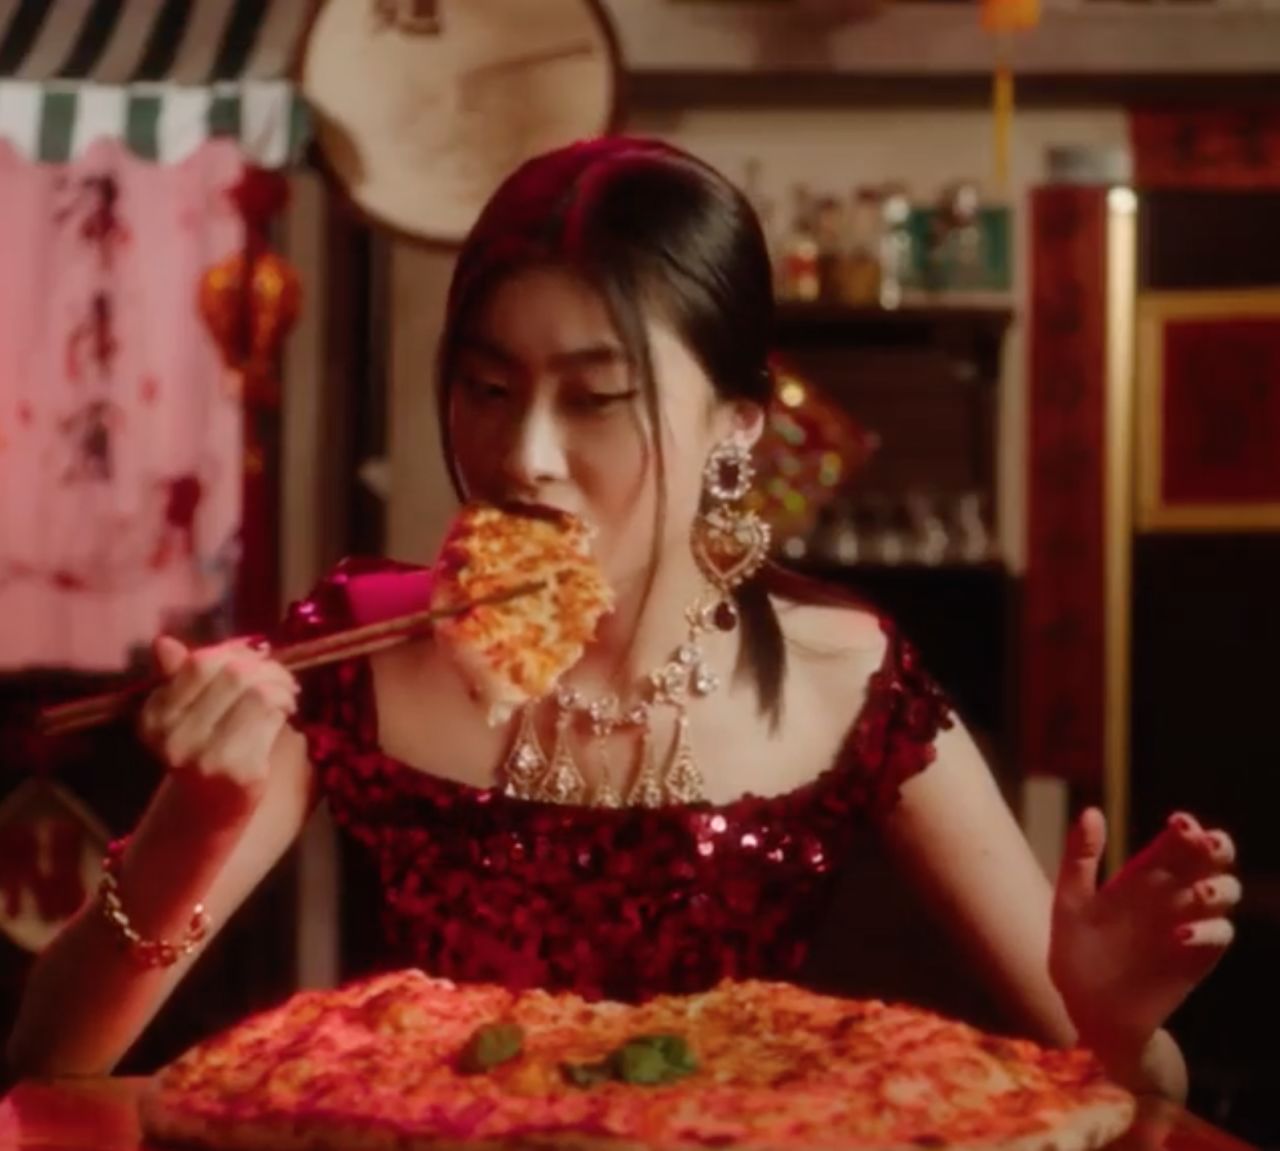 A model is seen eating pizza with chopsticks in one of three videos posted on social media by Dolce & Gabbana.